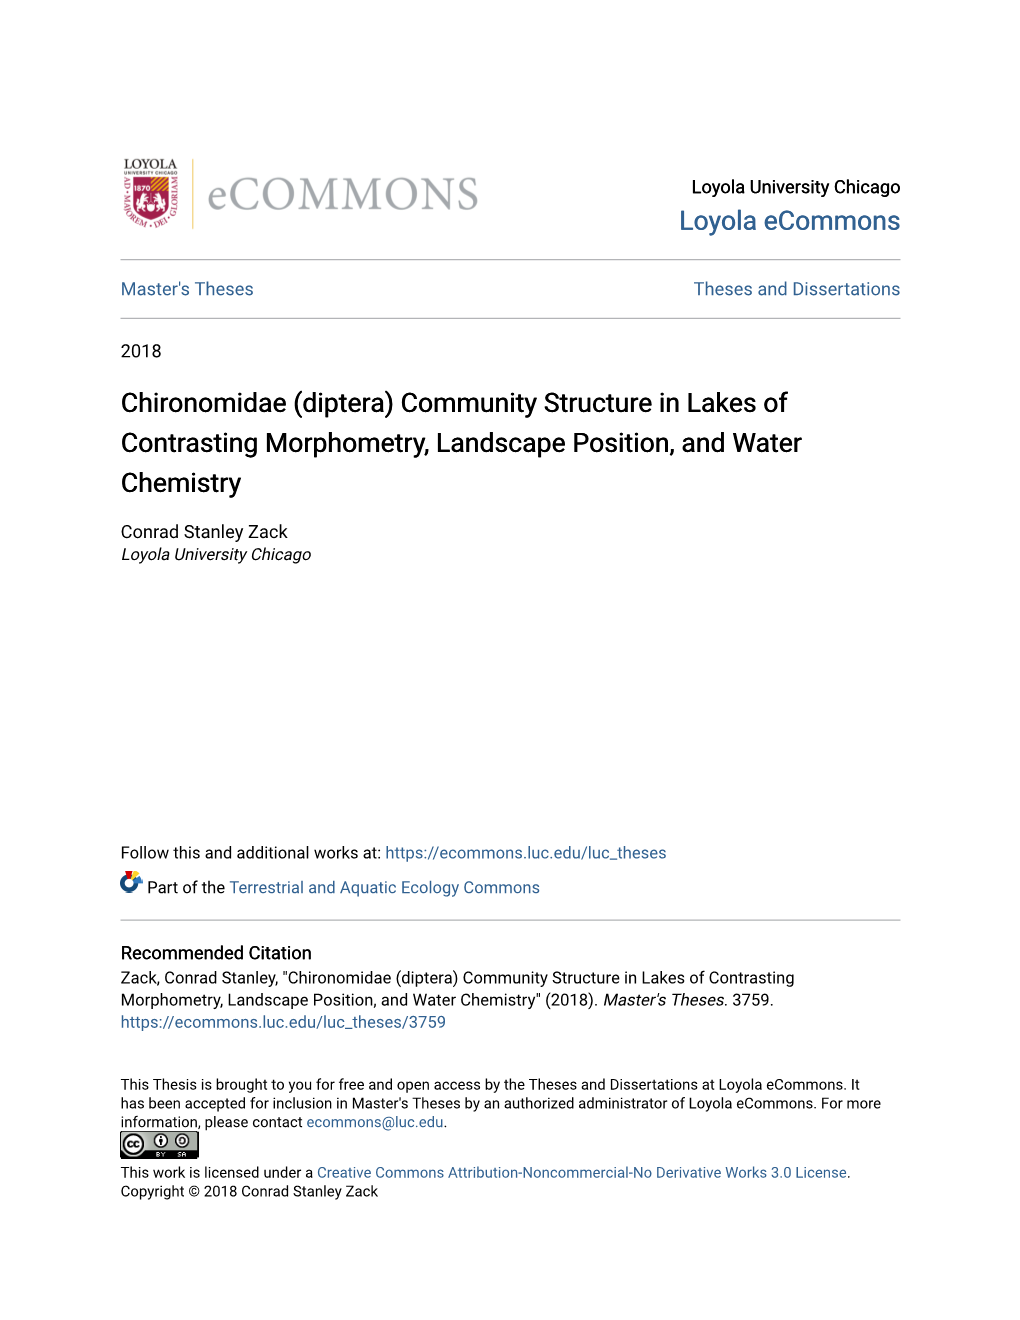 Chironomidae (Diptera) Community Structure in Lakes of Contrasting Morphometry, Landscape Position, and Water Chemistry